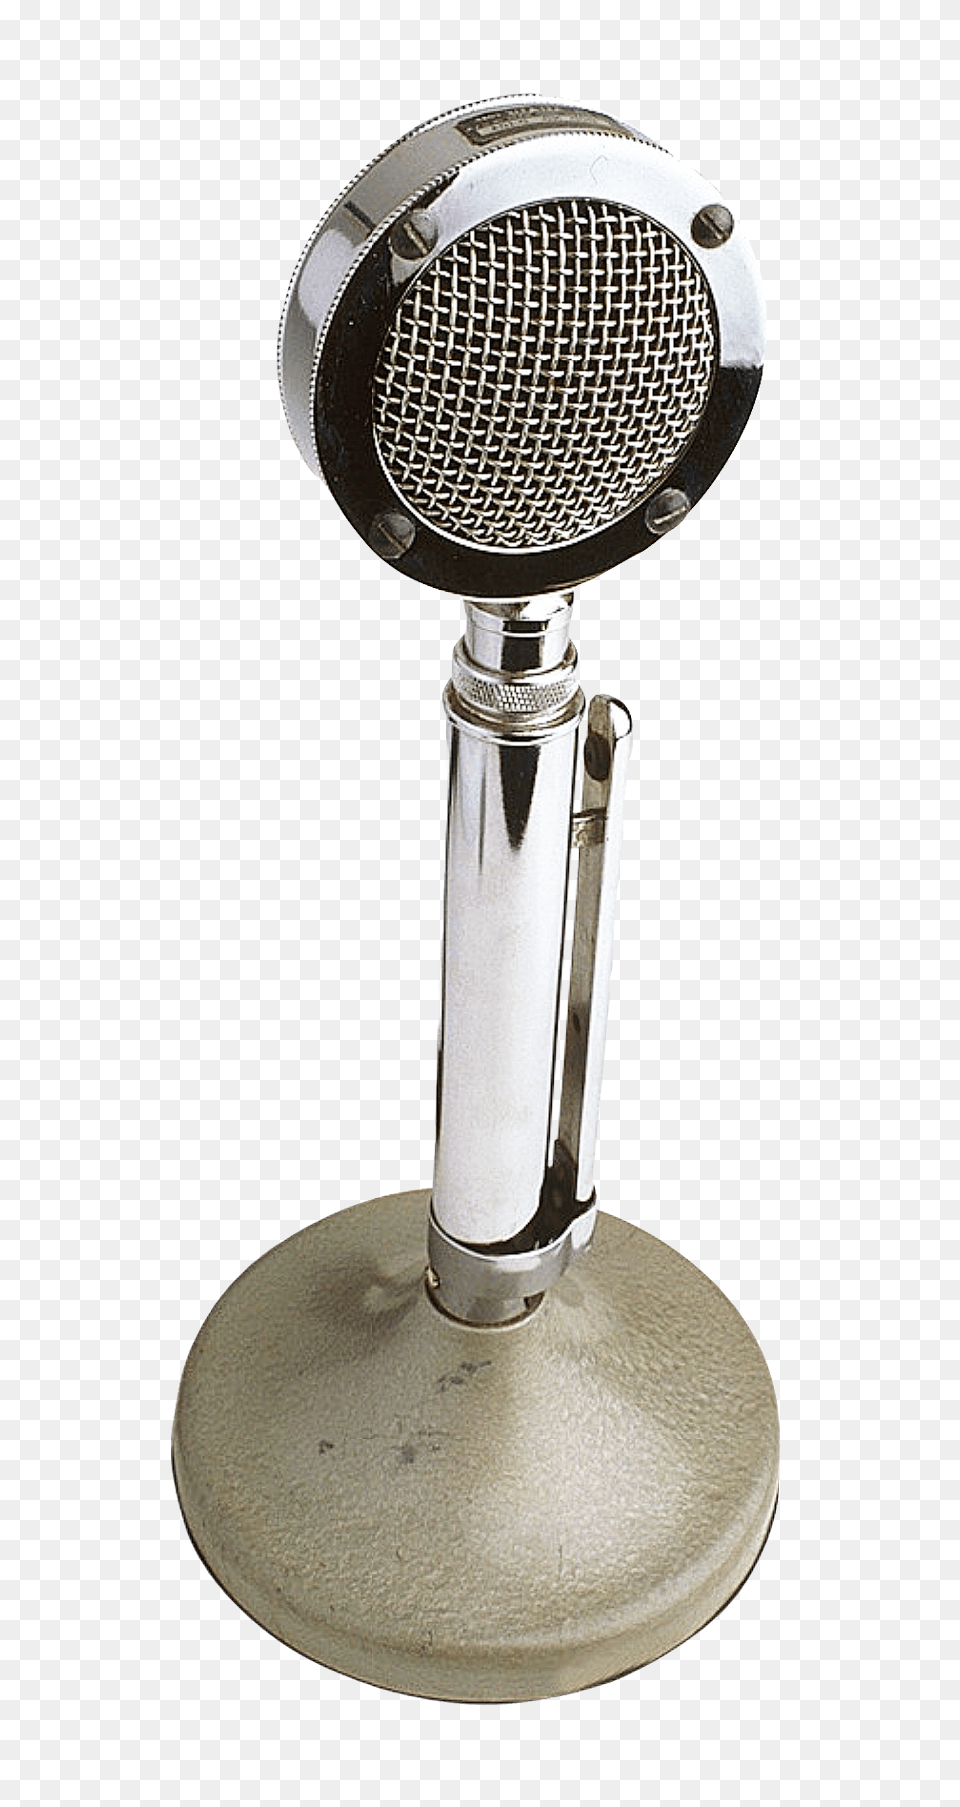 Pngpix Com Microphone Electrical Device, Smoke Pipe Free Transparent Png